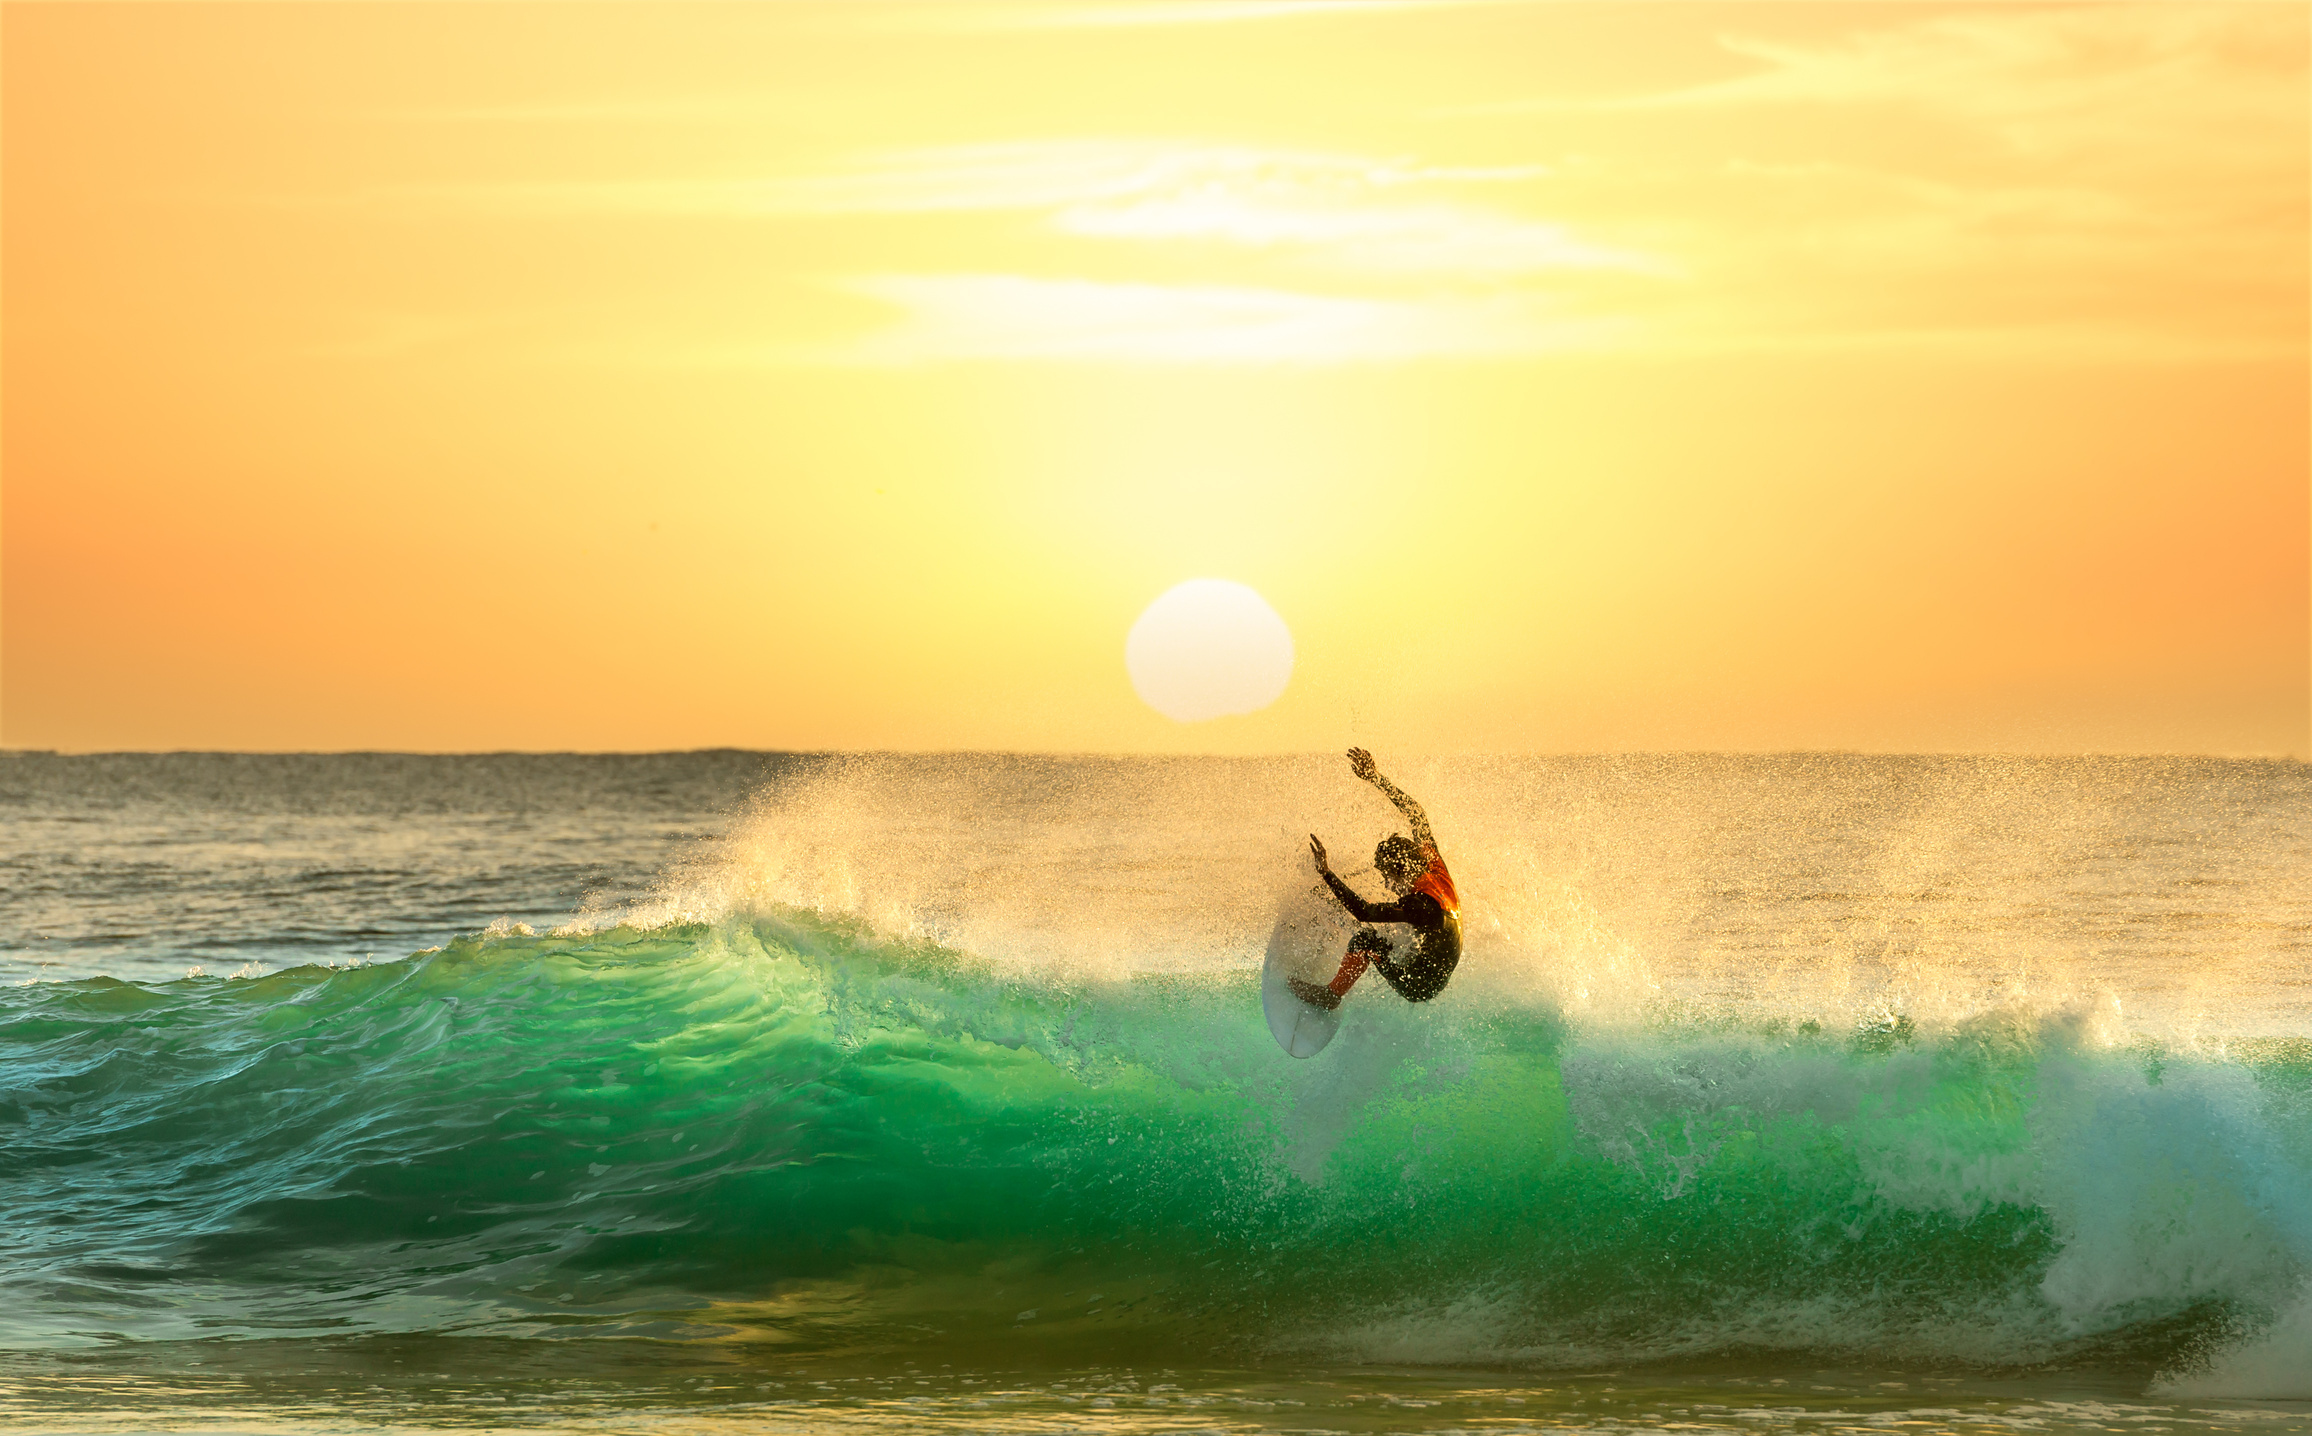 Surfing at Sunrise on a breaking wave